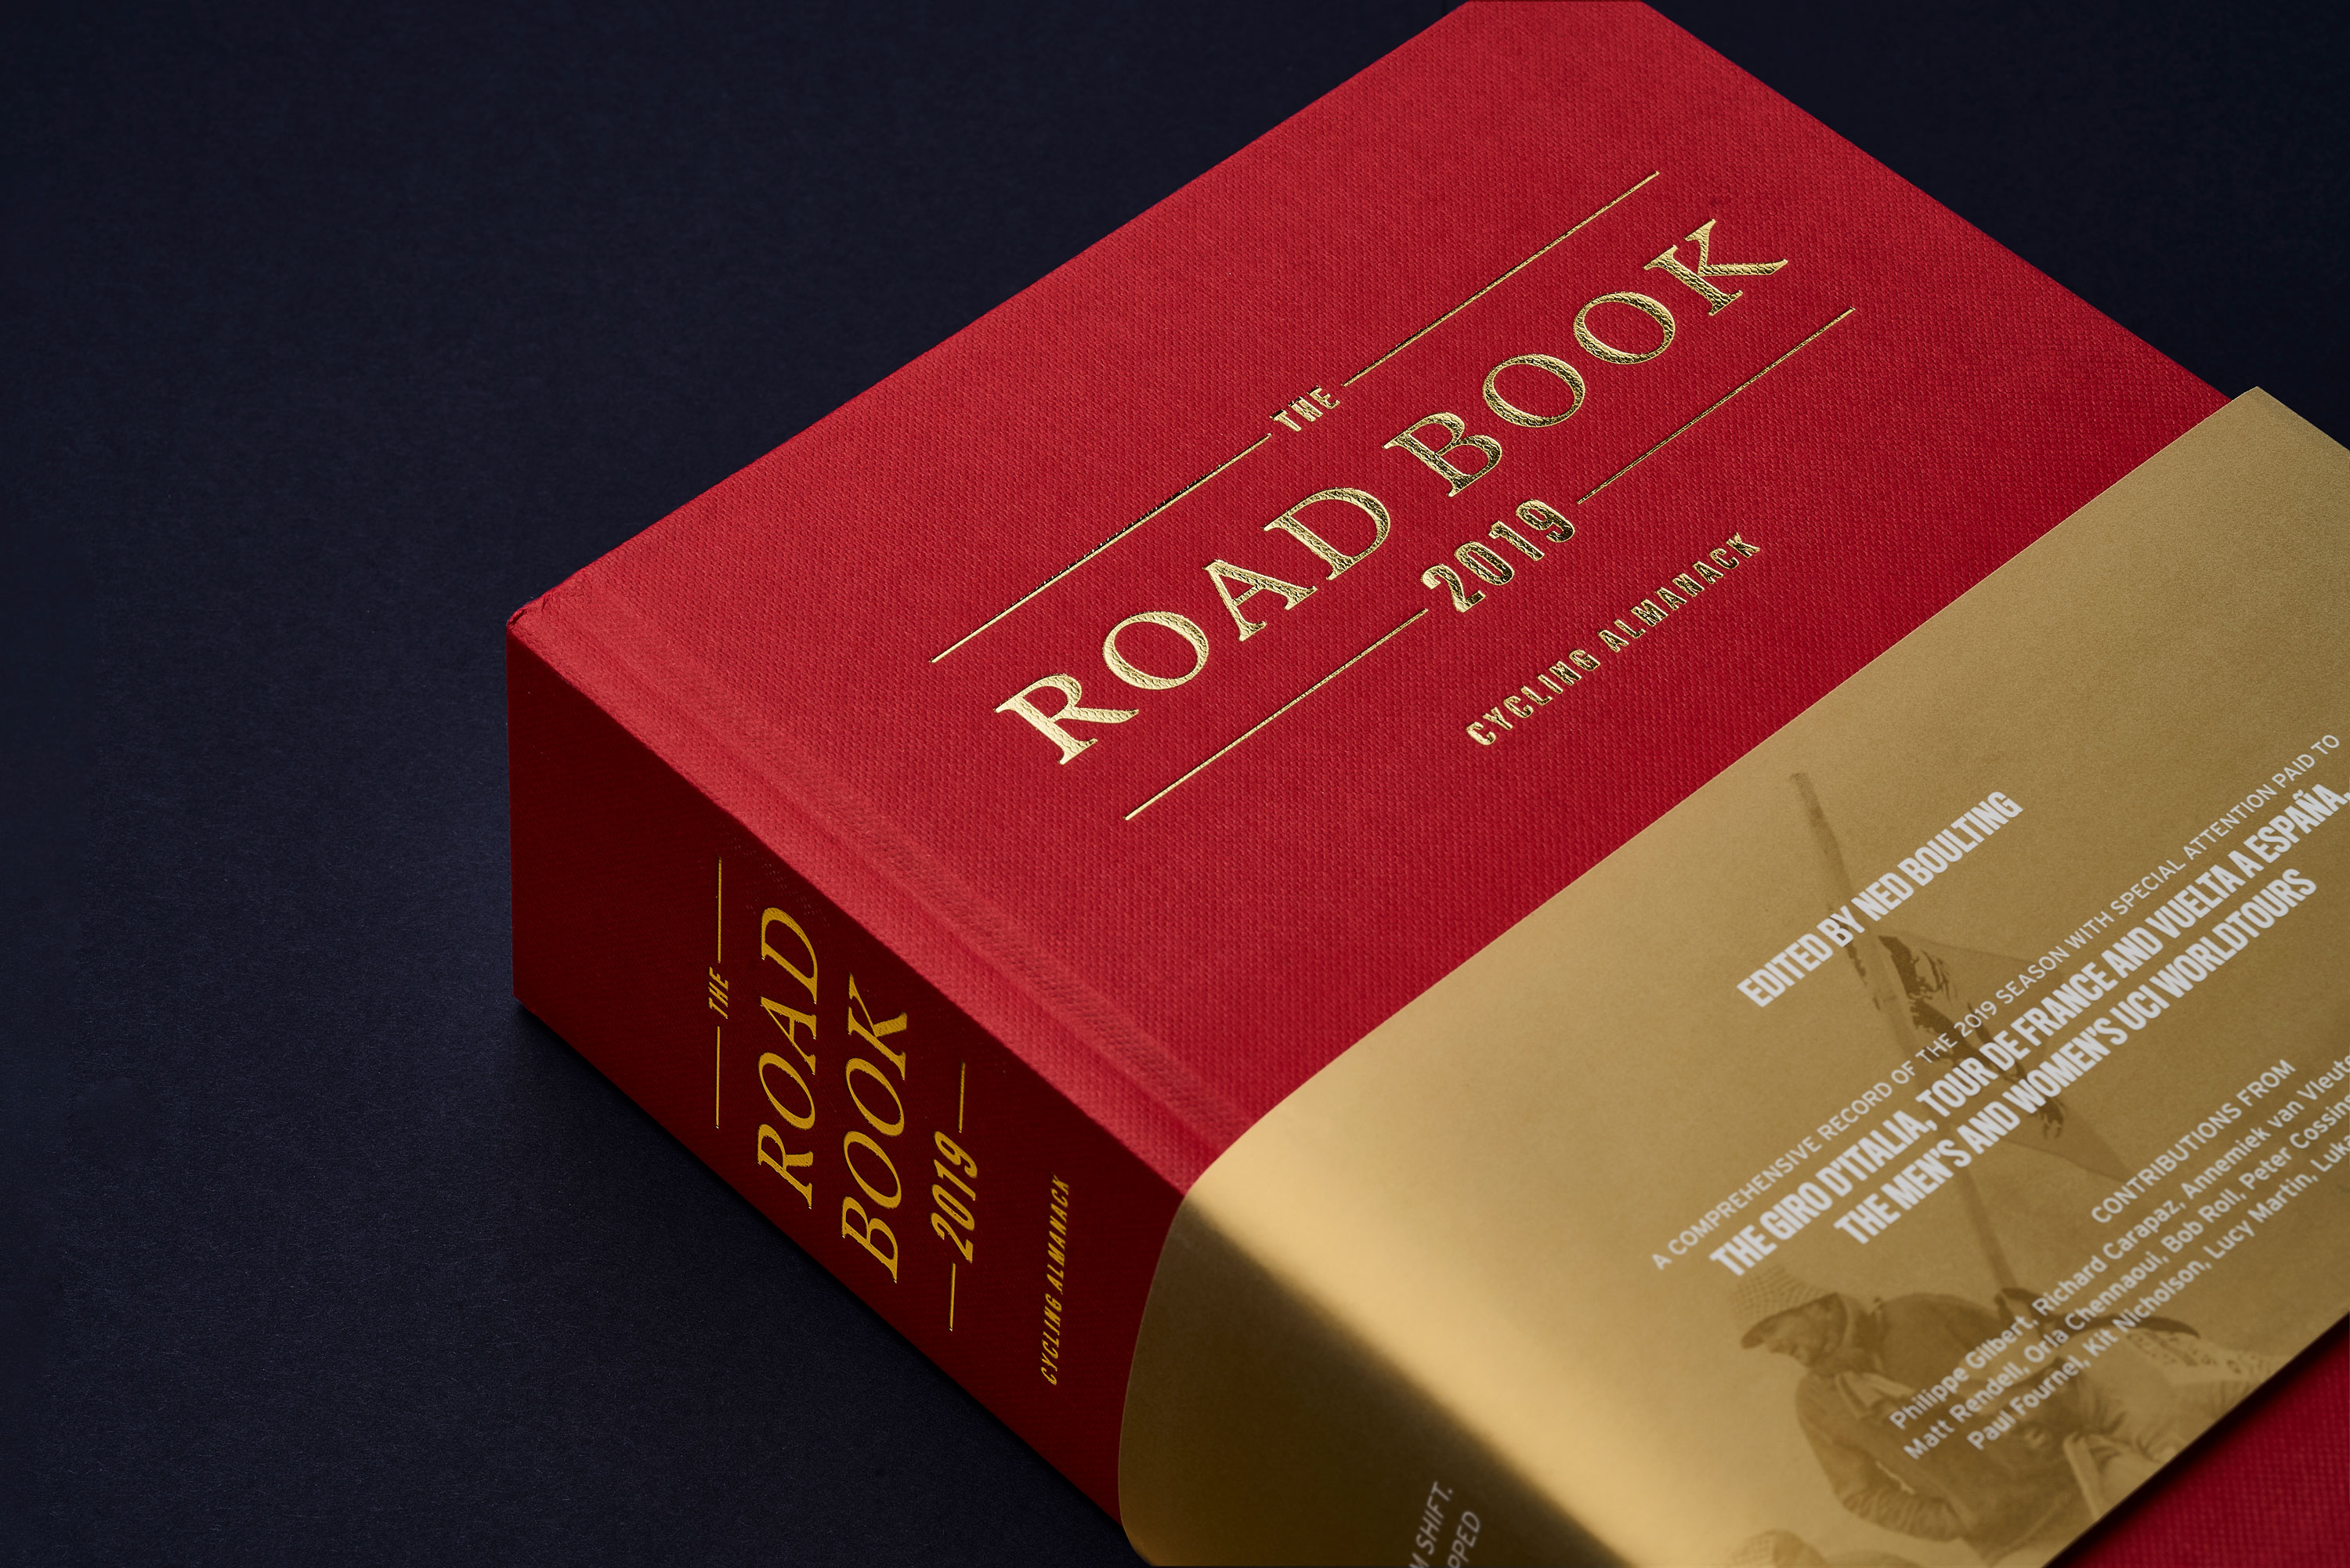 Review The Road Book 2019 road.cc